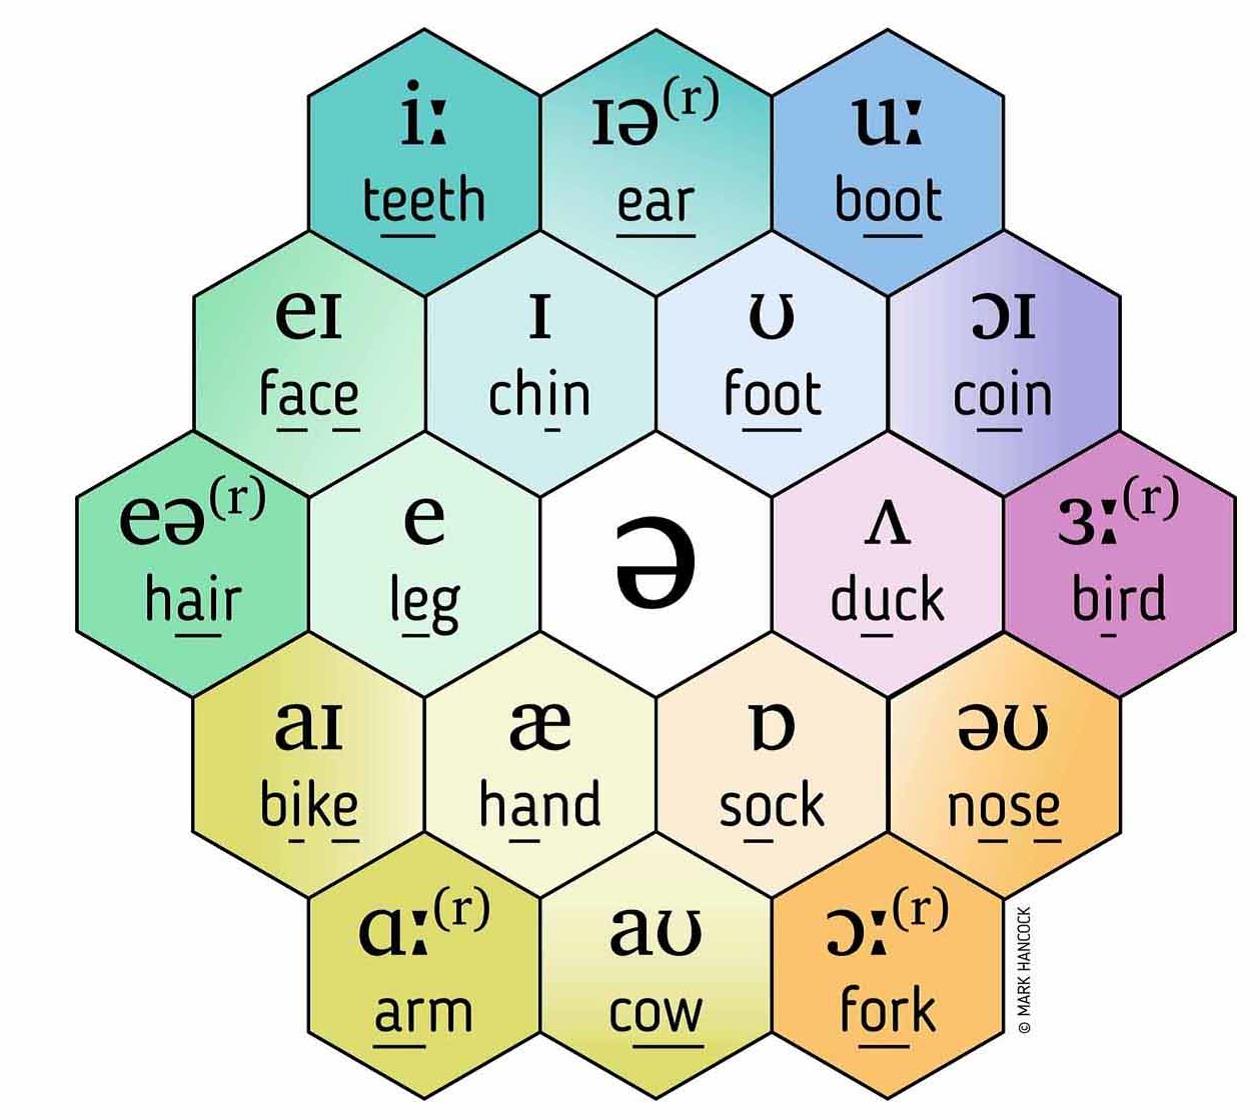 vowel-sounds-chart-with-examples-define-imagesee